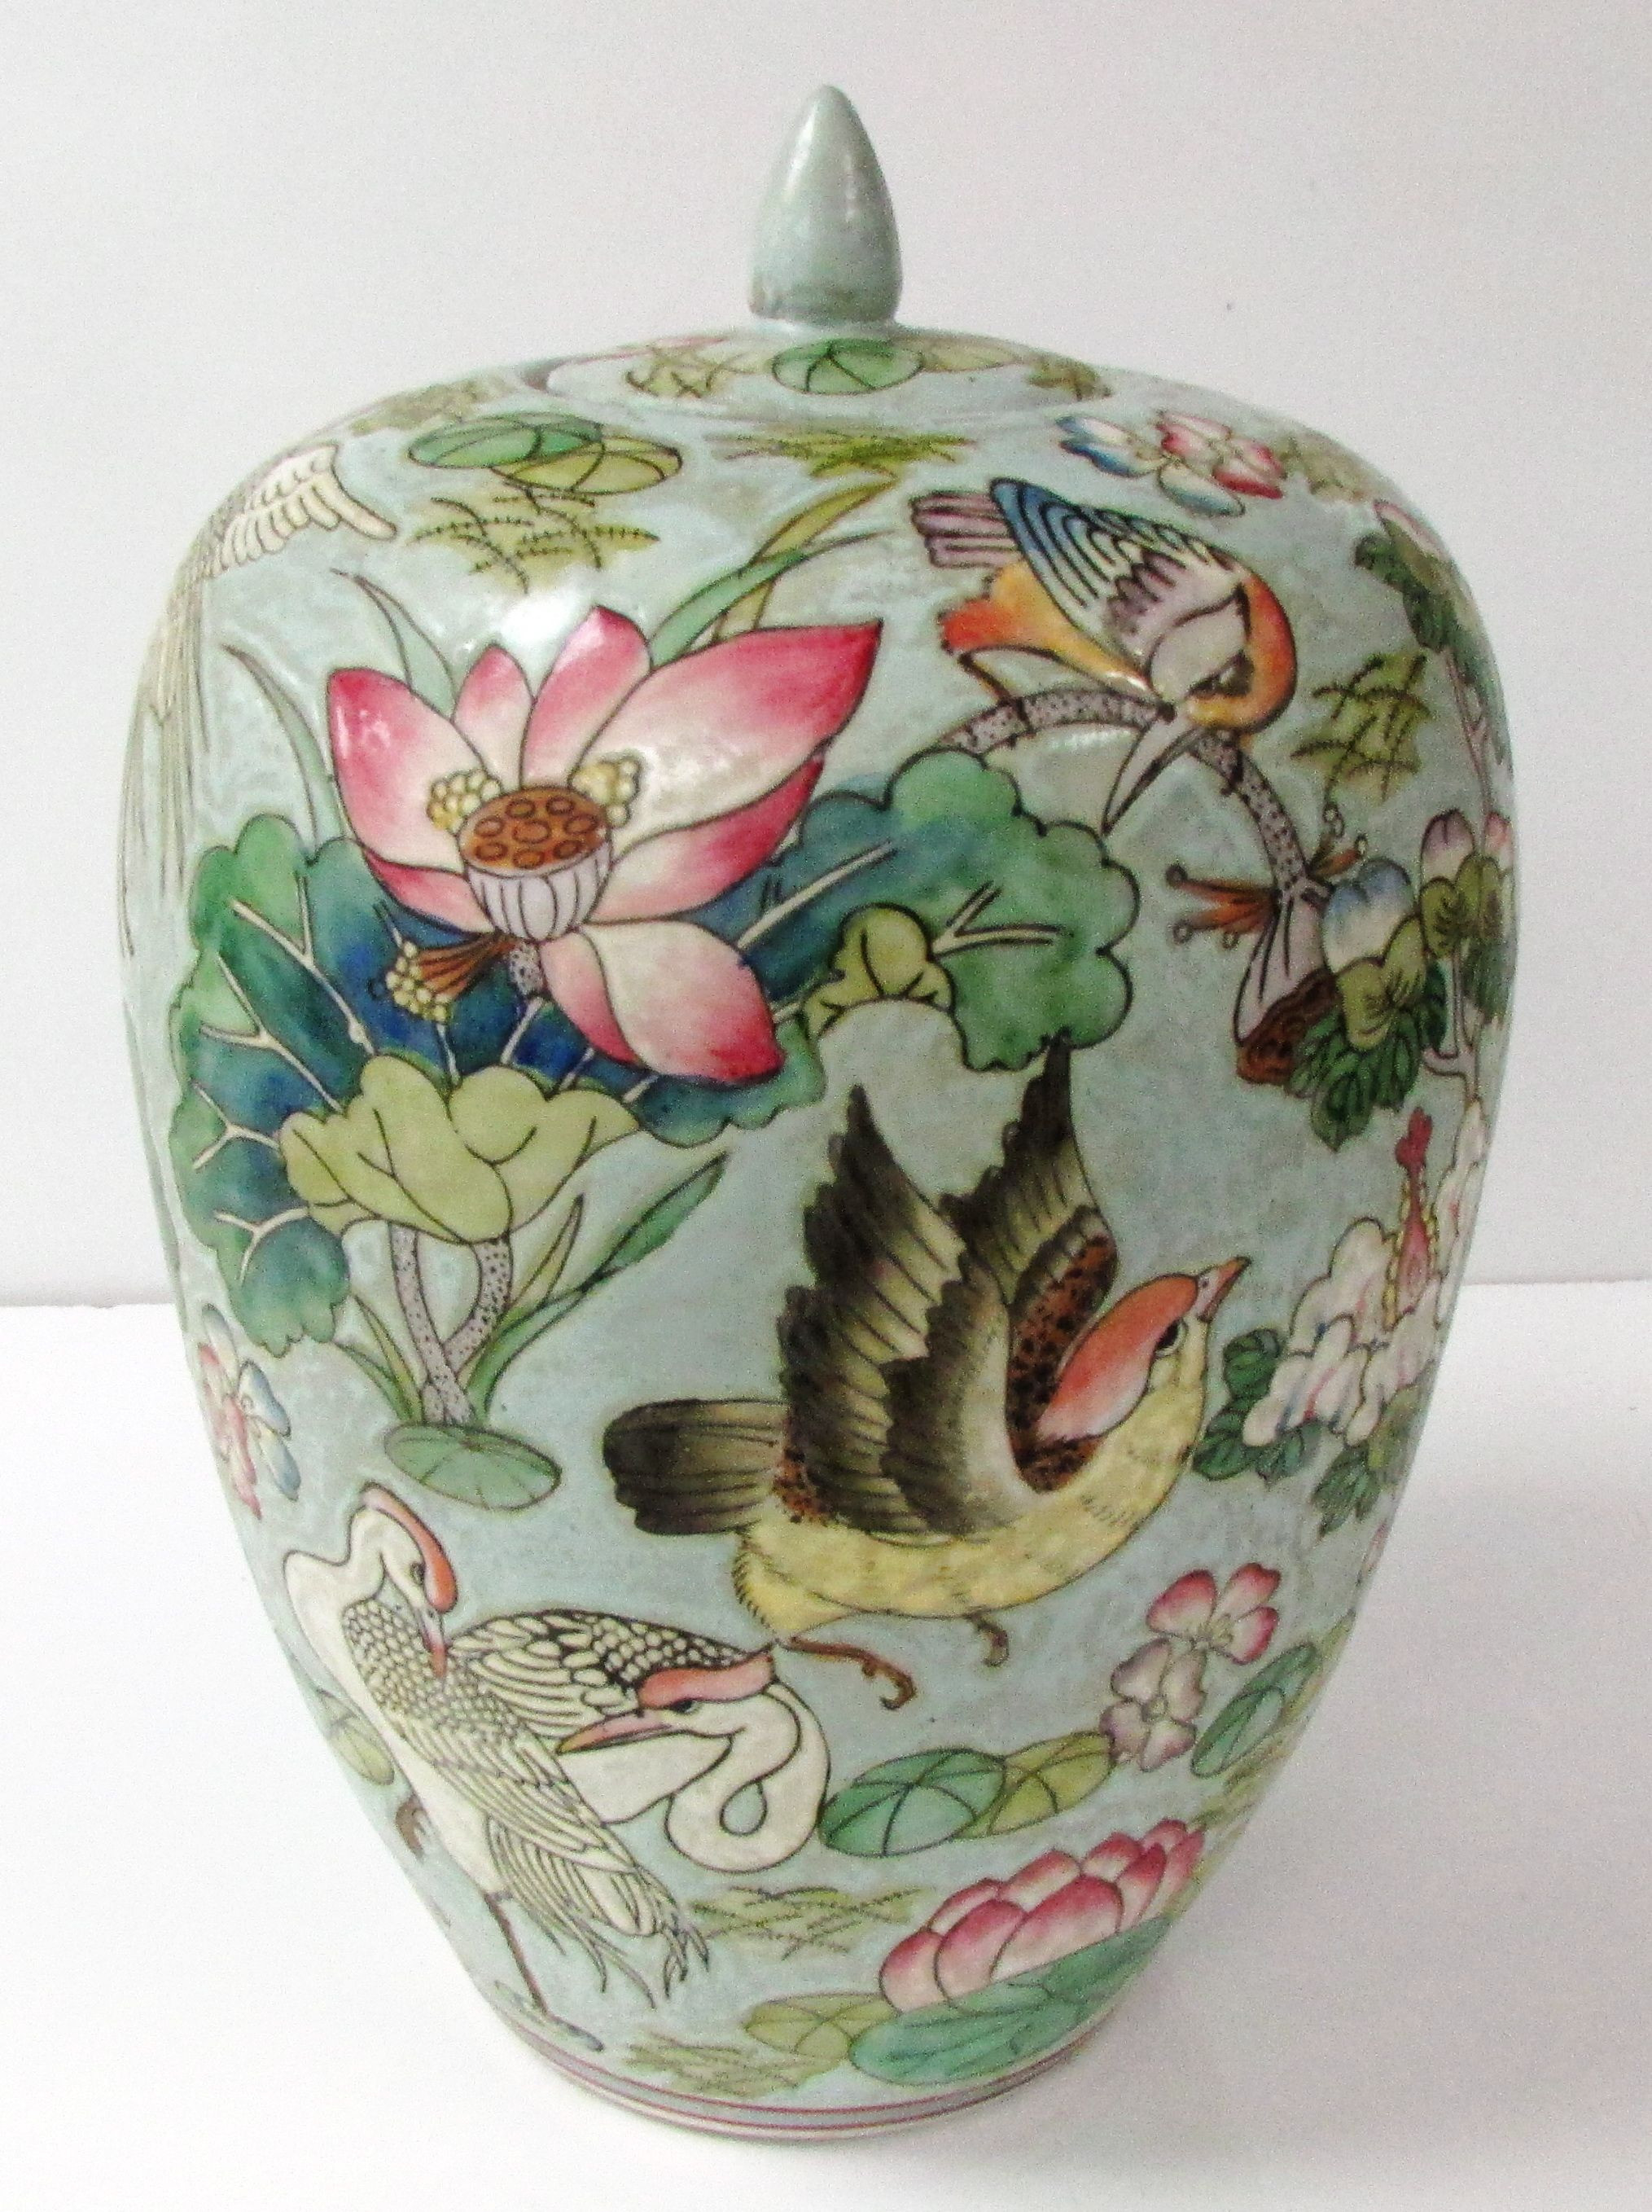 19 Recommended Hand Painted Satsuma Vase 2024 free download hand painted satsuma vase of ginger jars antique chinosoire famille ginger jars hand painted with regard to ginger jars antique chinosoire famille ginger jars hand painted glazed ceramic